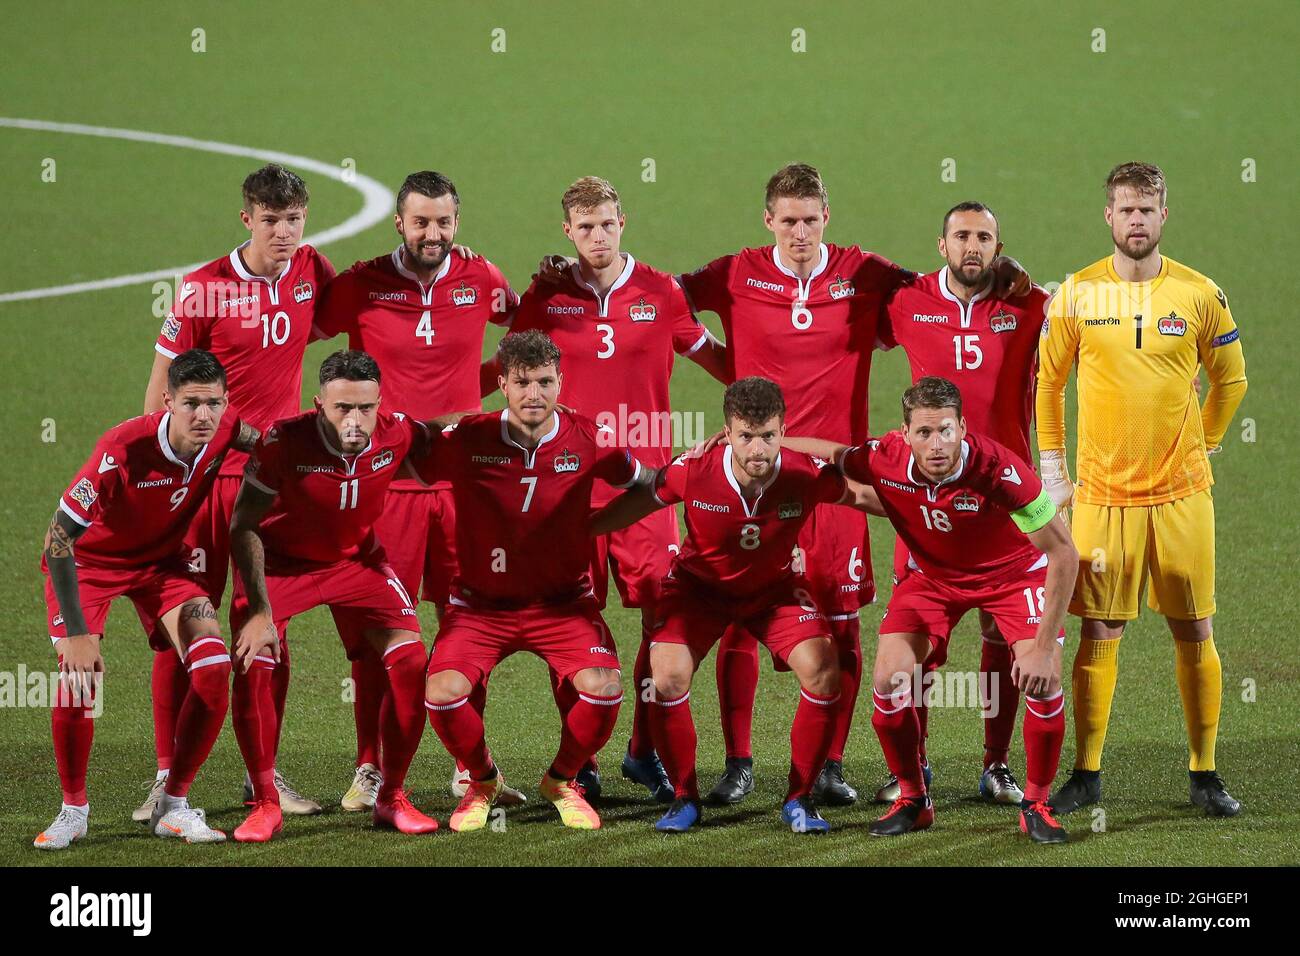 The Liechtenstein starting eleven line up for a team photo before kick off, back row ( L to R ); Noah Frick, Daniel Kaufmann, Maximilian Goppel, Andreas Malin, Seyhan Yildiz and Benjamin Buchel, front row ( L to R ); Yanik Frick, Dennis Salanovic, Marcel Buchel, Aron Sele and Nicolas Hasler during the UEFA Nations League match at Stadio Romeo Neri, Rimini. Picture date: 8th September 2020. Picture credit should read: Jonathan Moscrop/Sportimage via PA Images Stock Photo